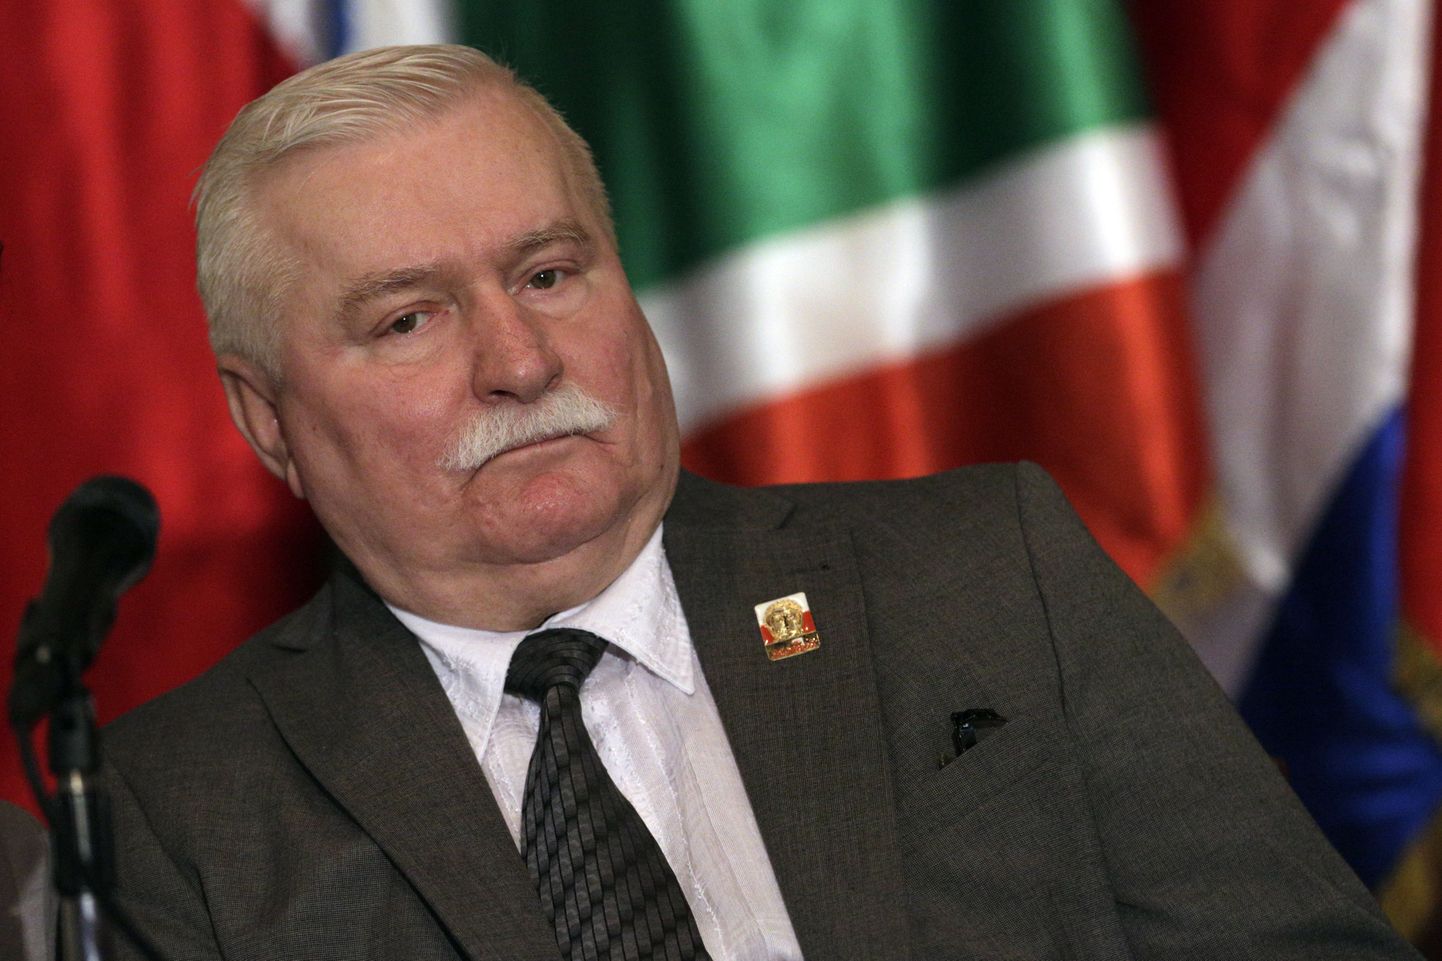 Former Polish President and 1983 Nobel Peace Prize laureate Lech Walesa attends a news conference after the special session of the National Assembly in Caracas, Venezuela, February 18, 2016. REUTERS/Marco Bello